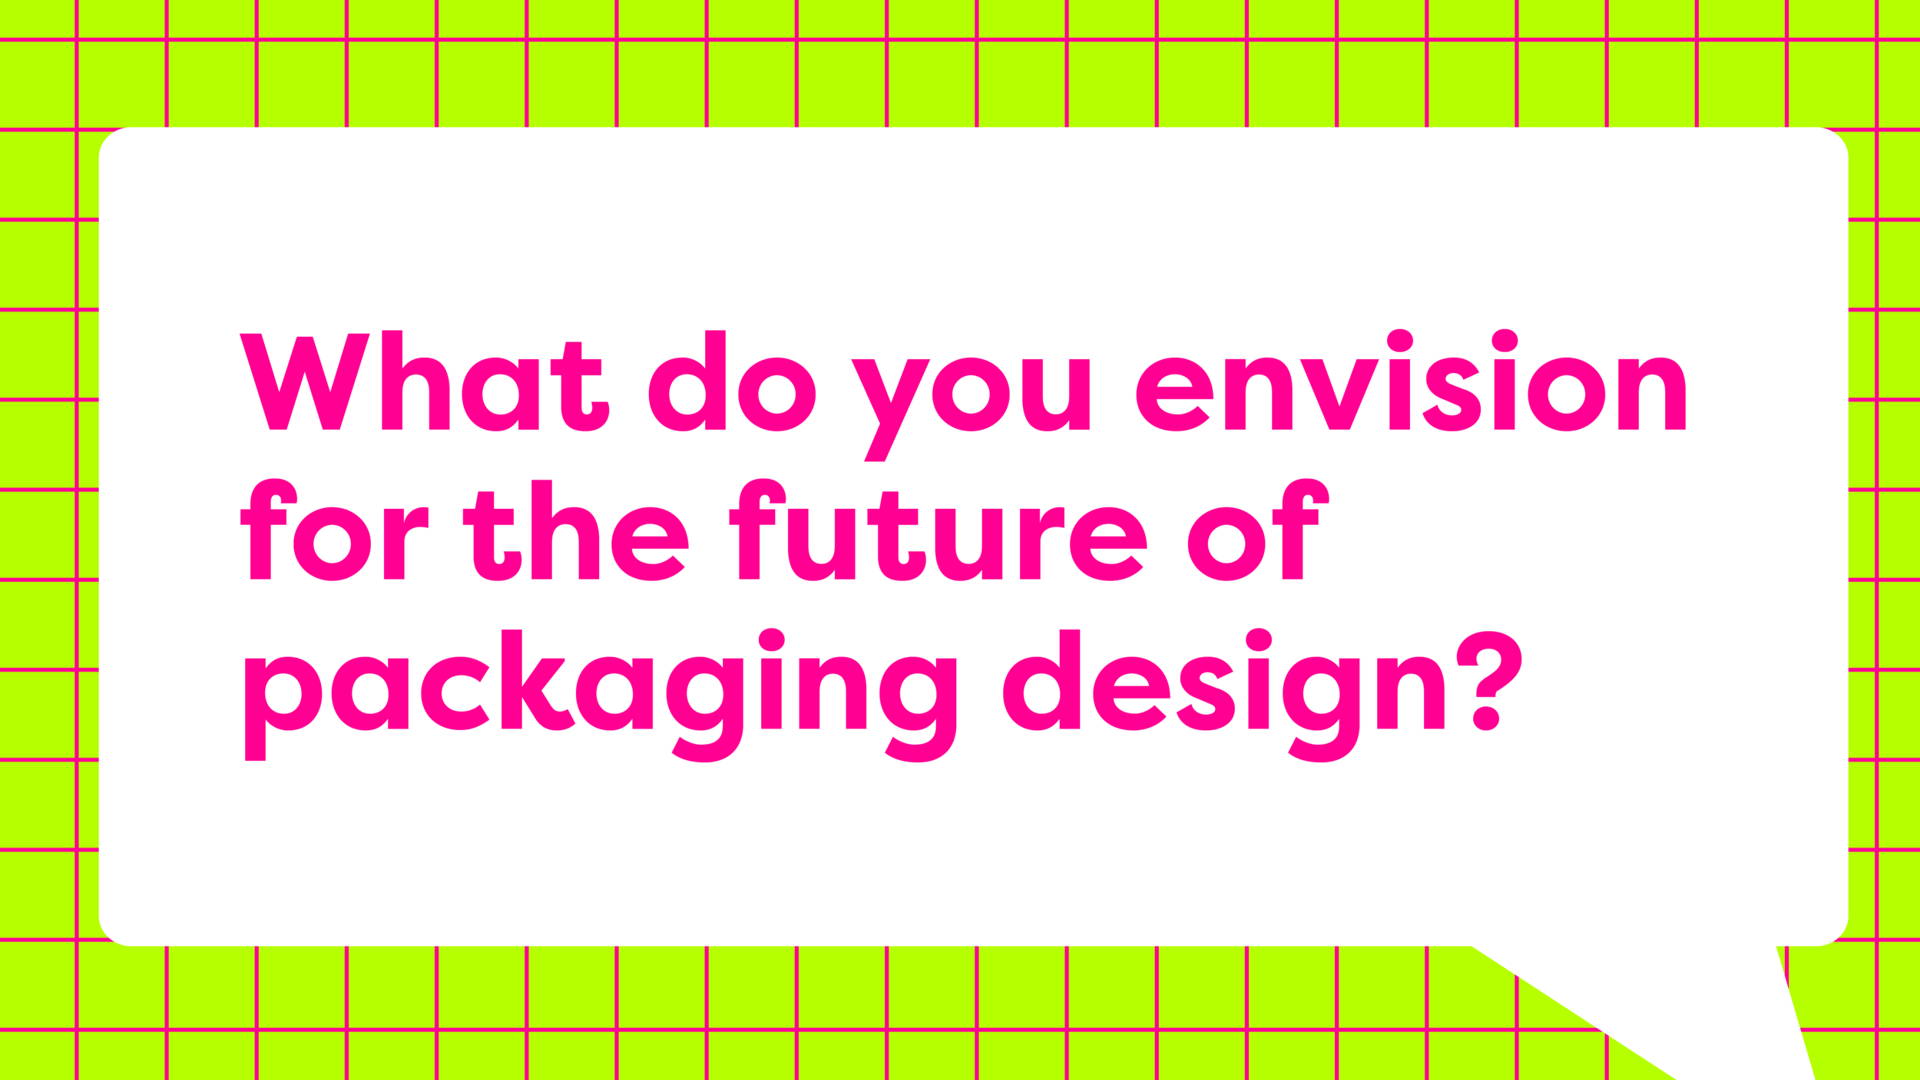 Featured image for What do you envision for the future of packaging design?